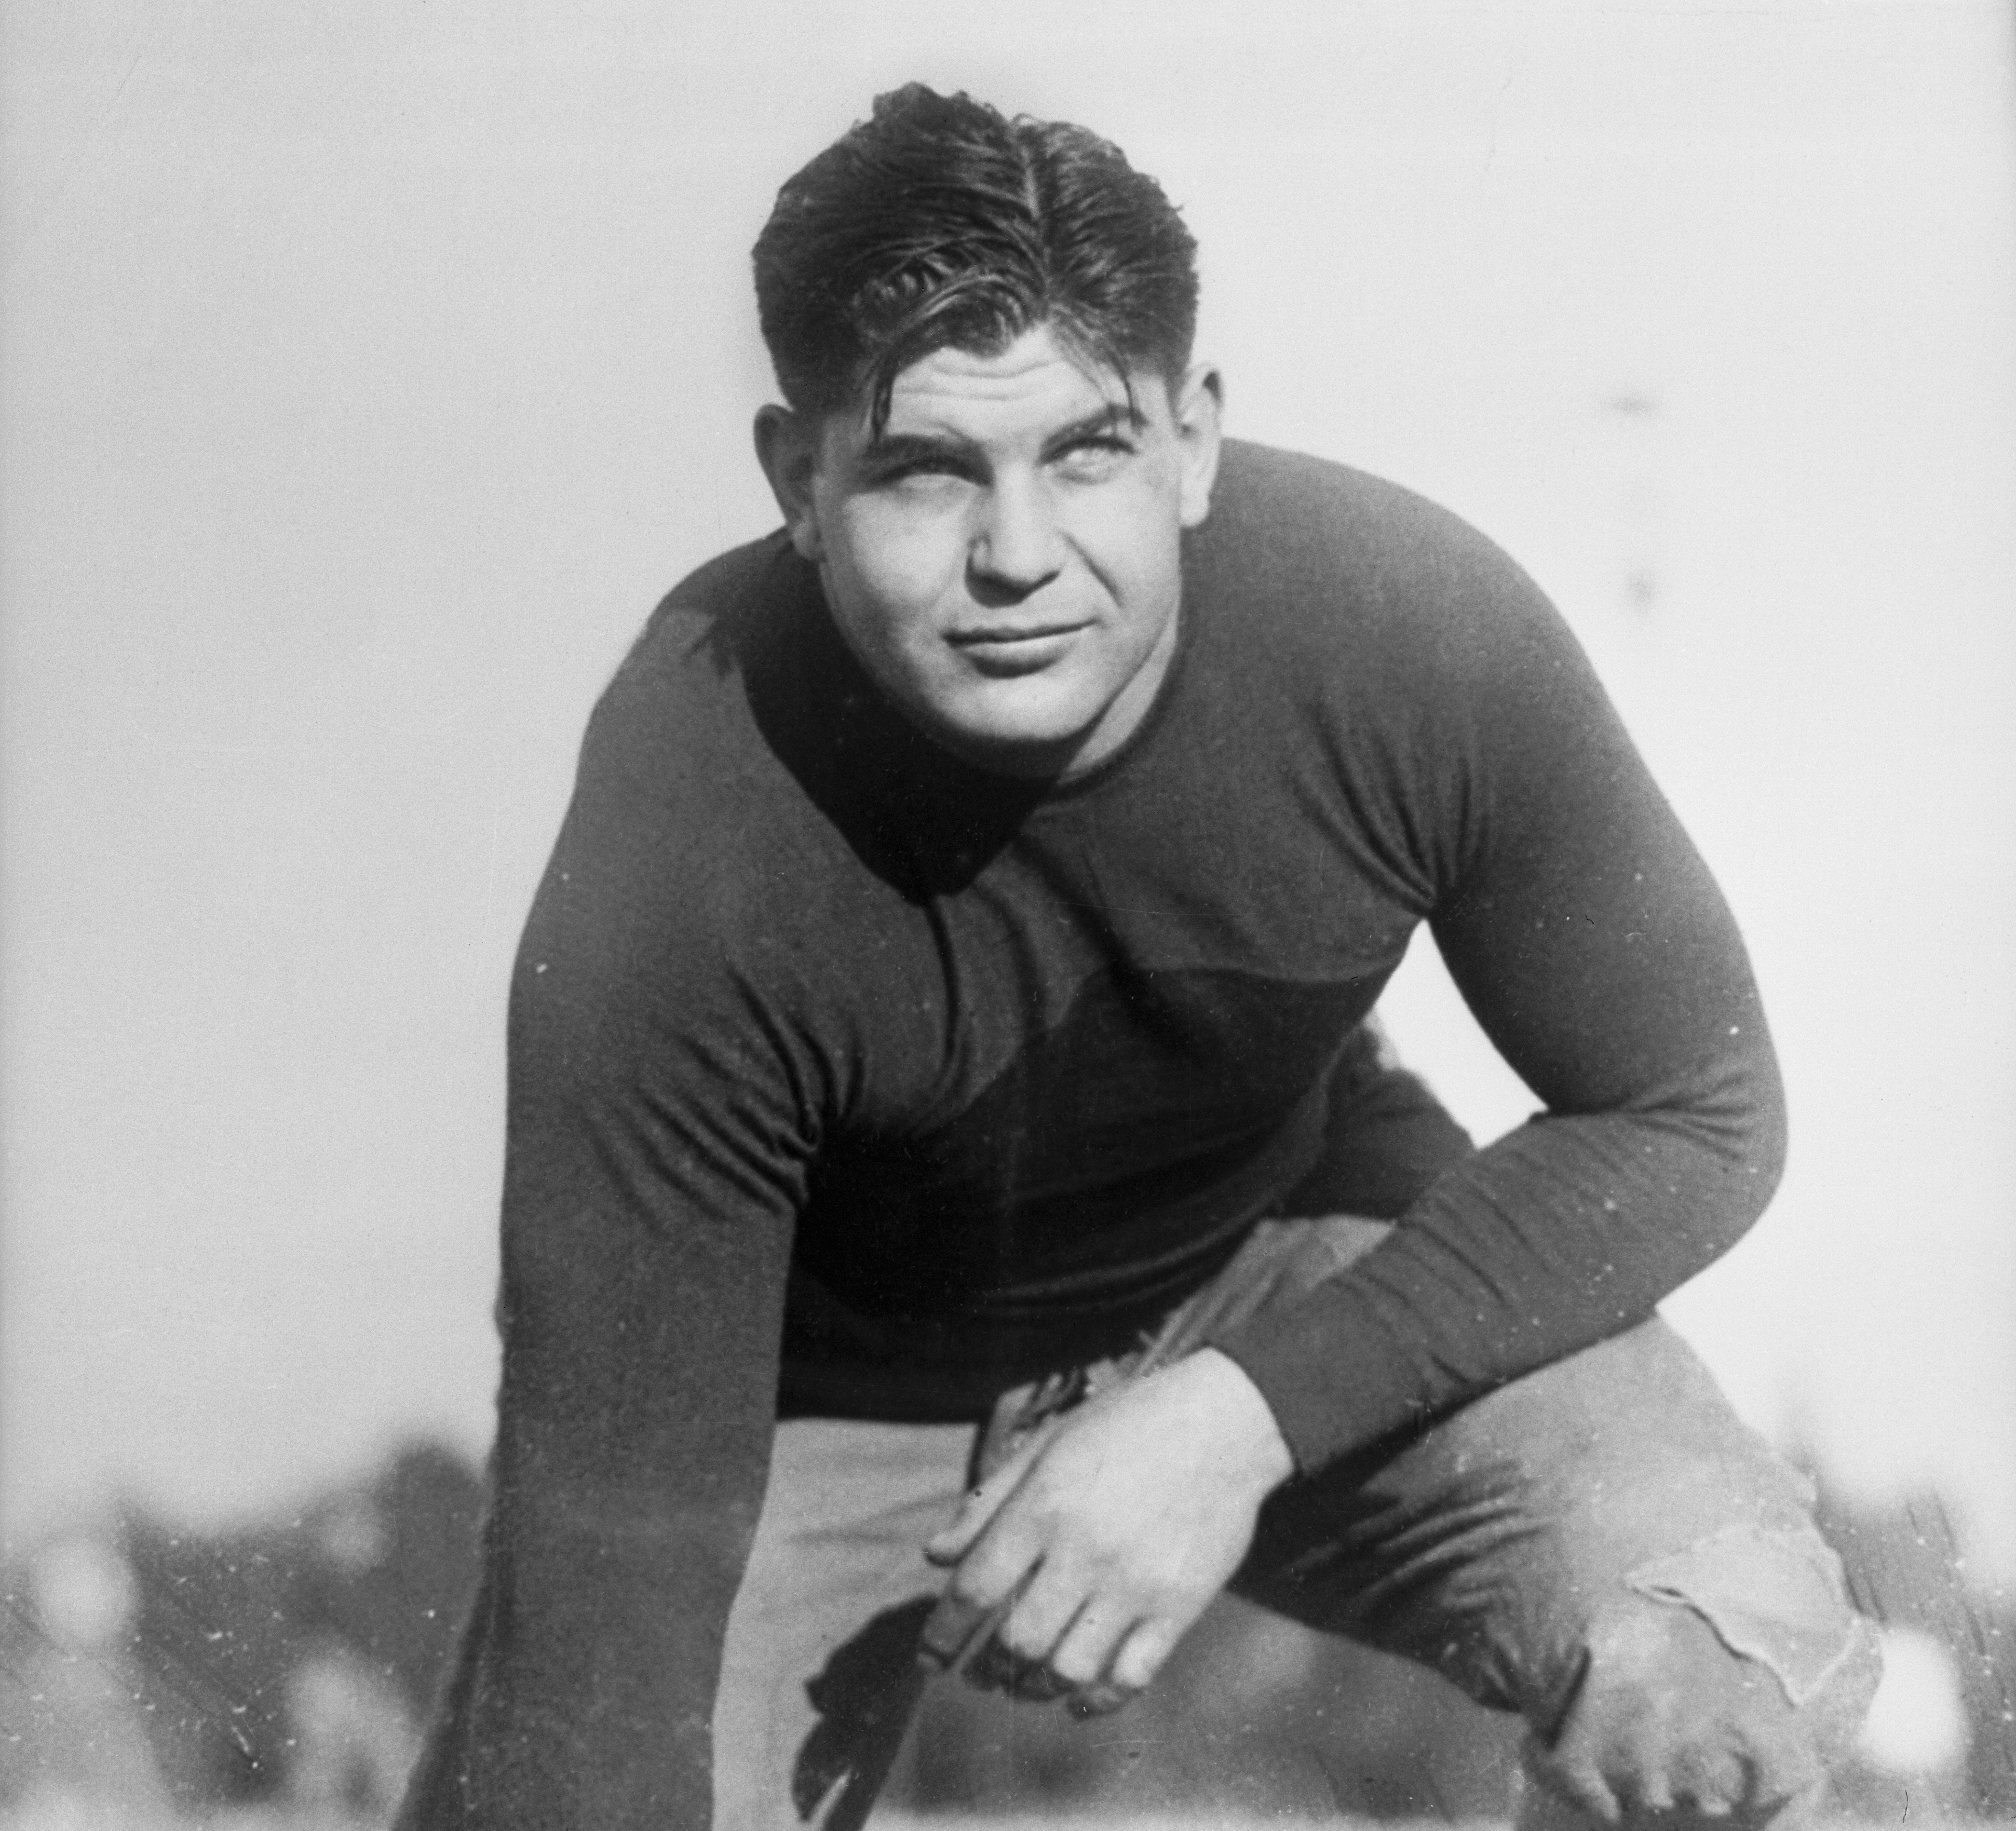 Tackle Turk Edwards in 1930